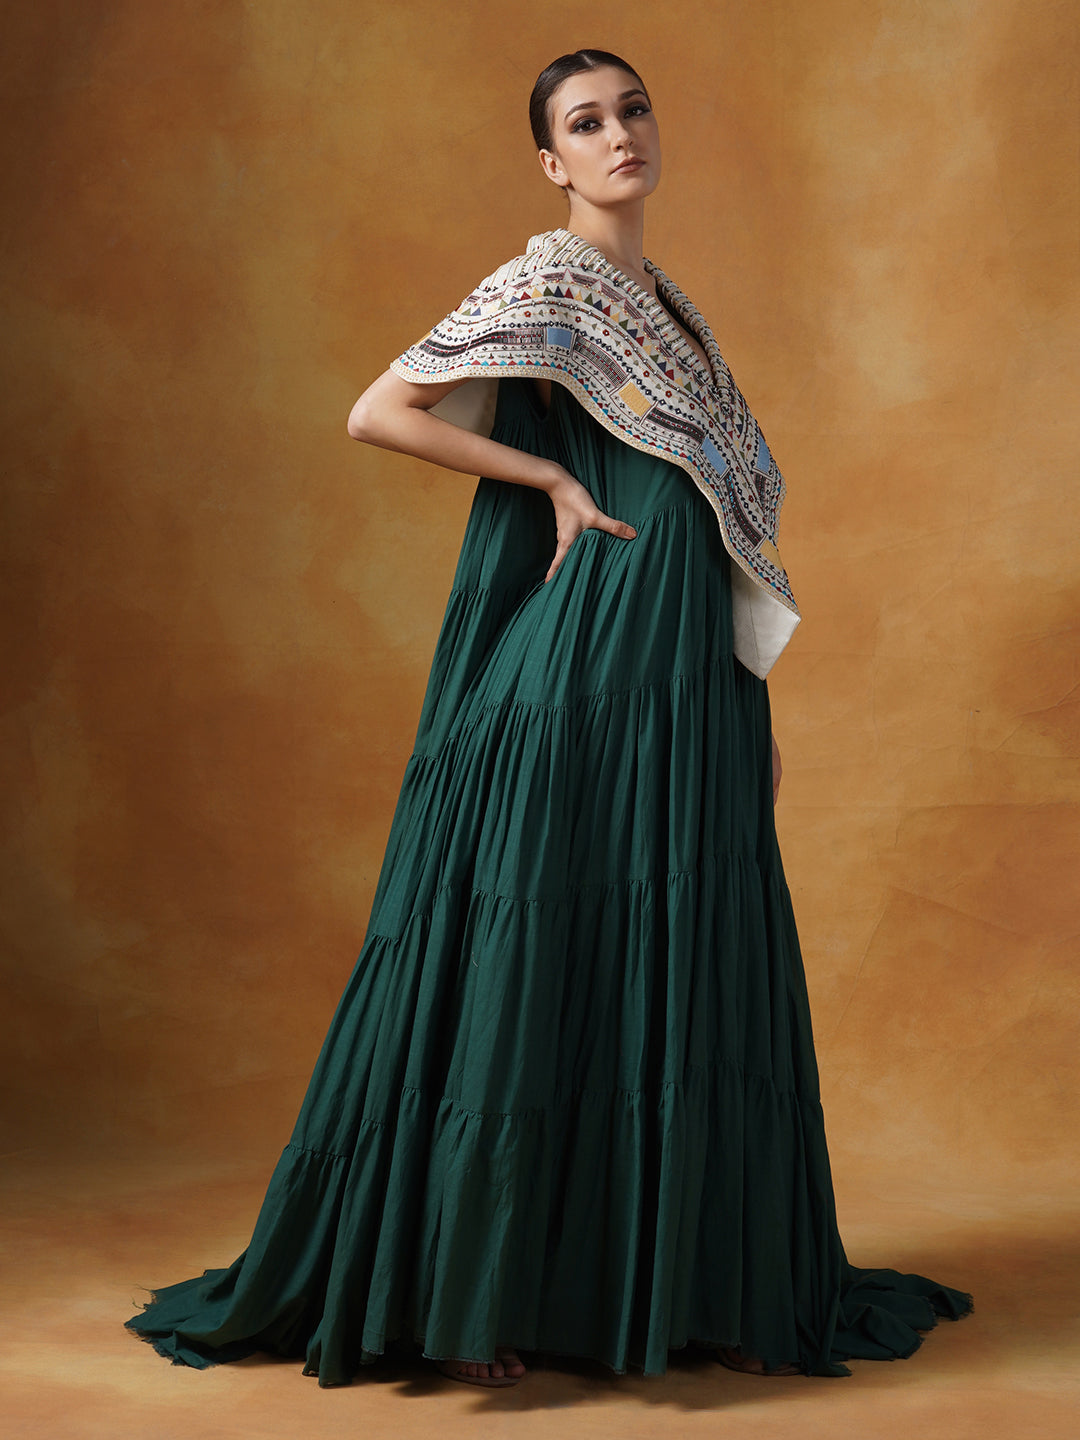 Floor length cotton tier dress in olive green. It is topped with a heavy embroidered cape around the neckline and shoulders.